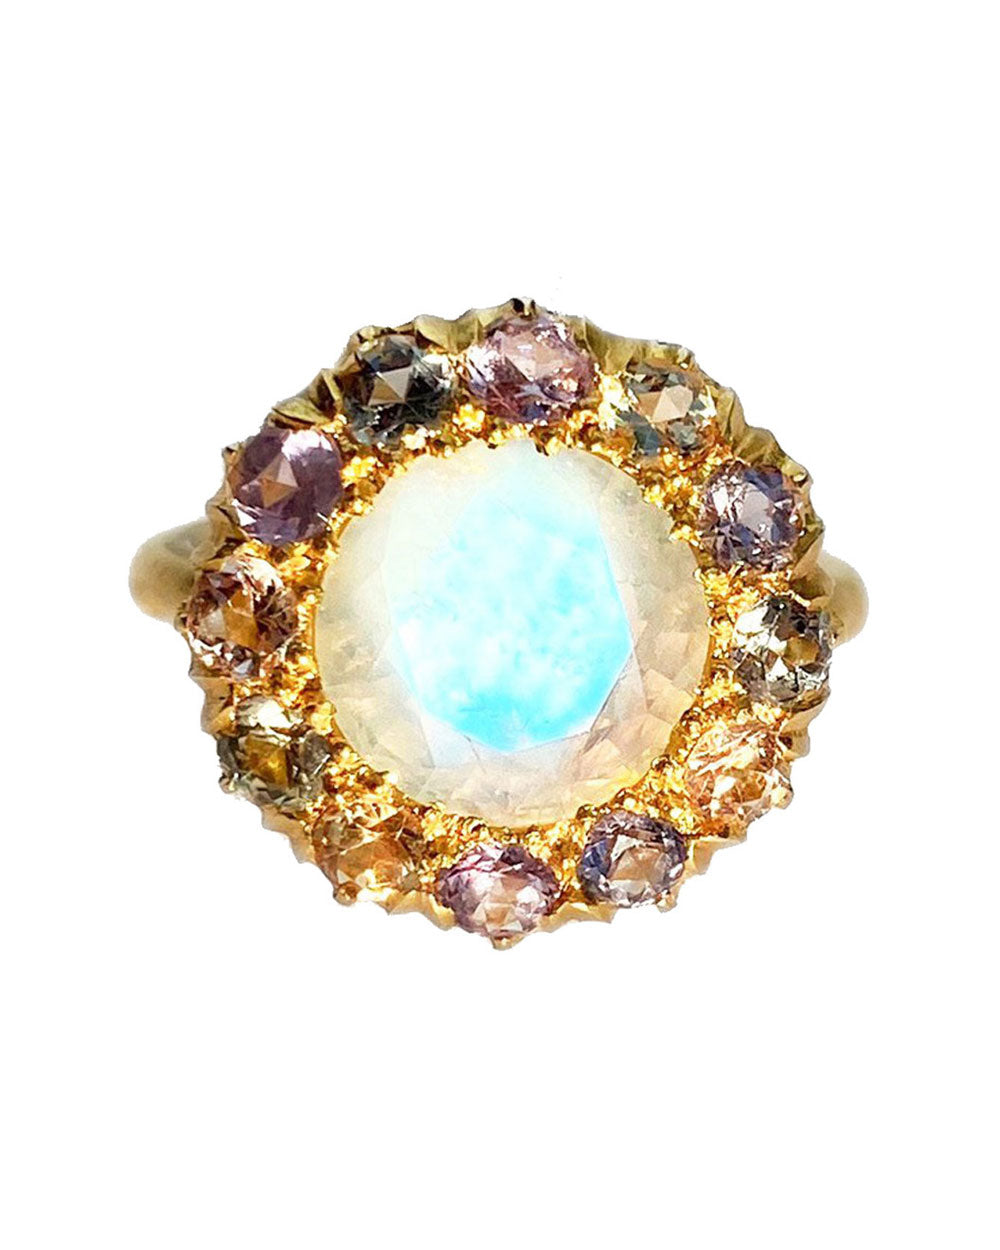 22k Yellow Gold Princess D. Marguerite Ring